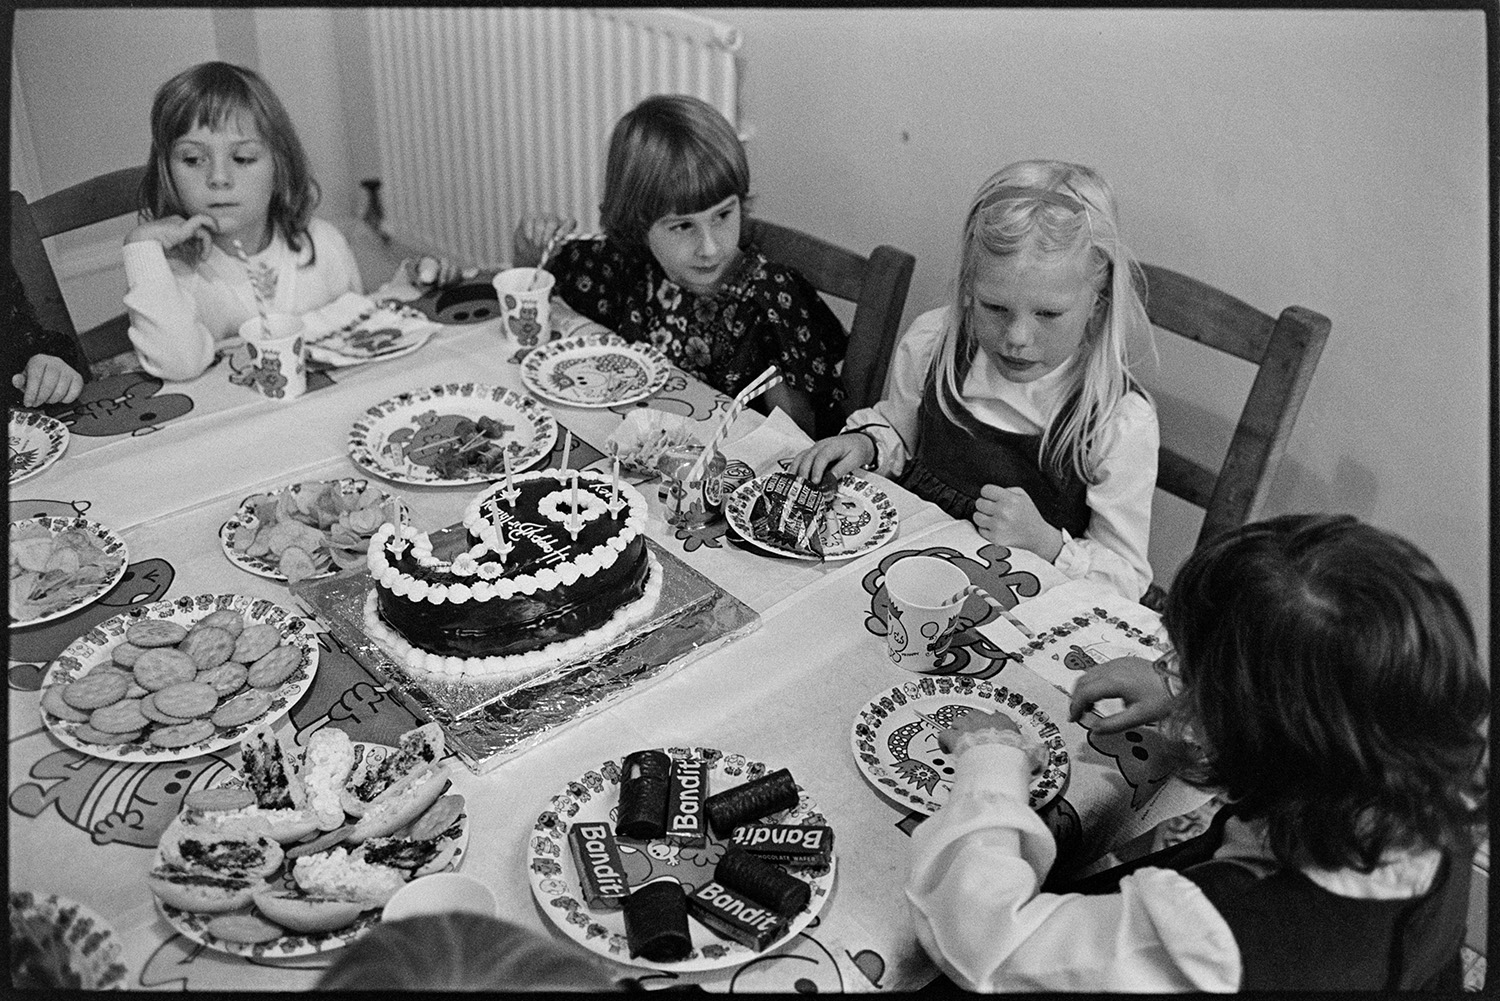 Birthday tea party, wonderful spread with cakes and children stuffing themselves, eating. 
[Girls sat round a table eating party food at the 6th birthday of Hilary and Roger Hill's child, at Marwood House. The table is laid with chocolates, cakes, biscuits and crisps, with a birthday cake in the shape of the number 6 in the middle.]